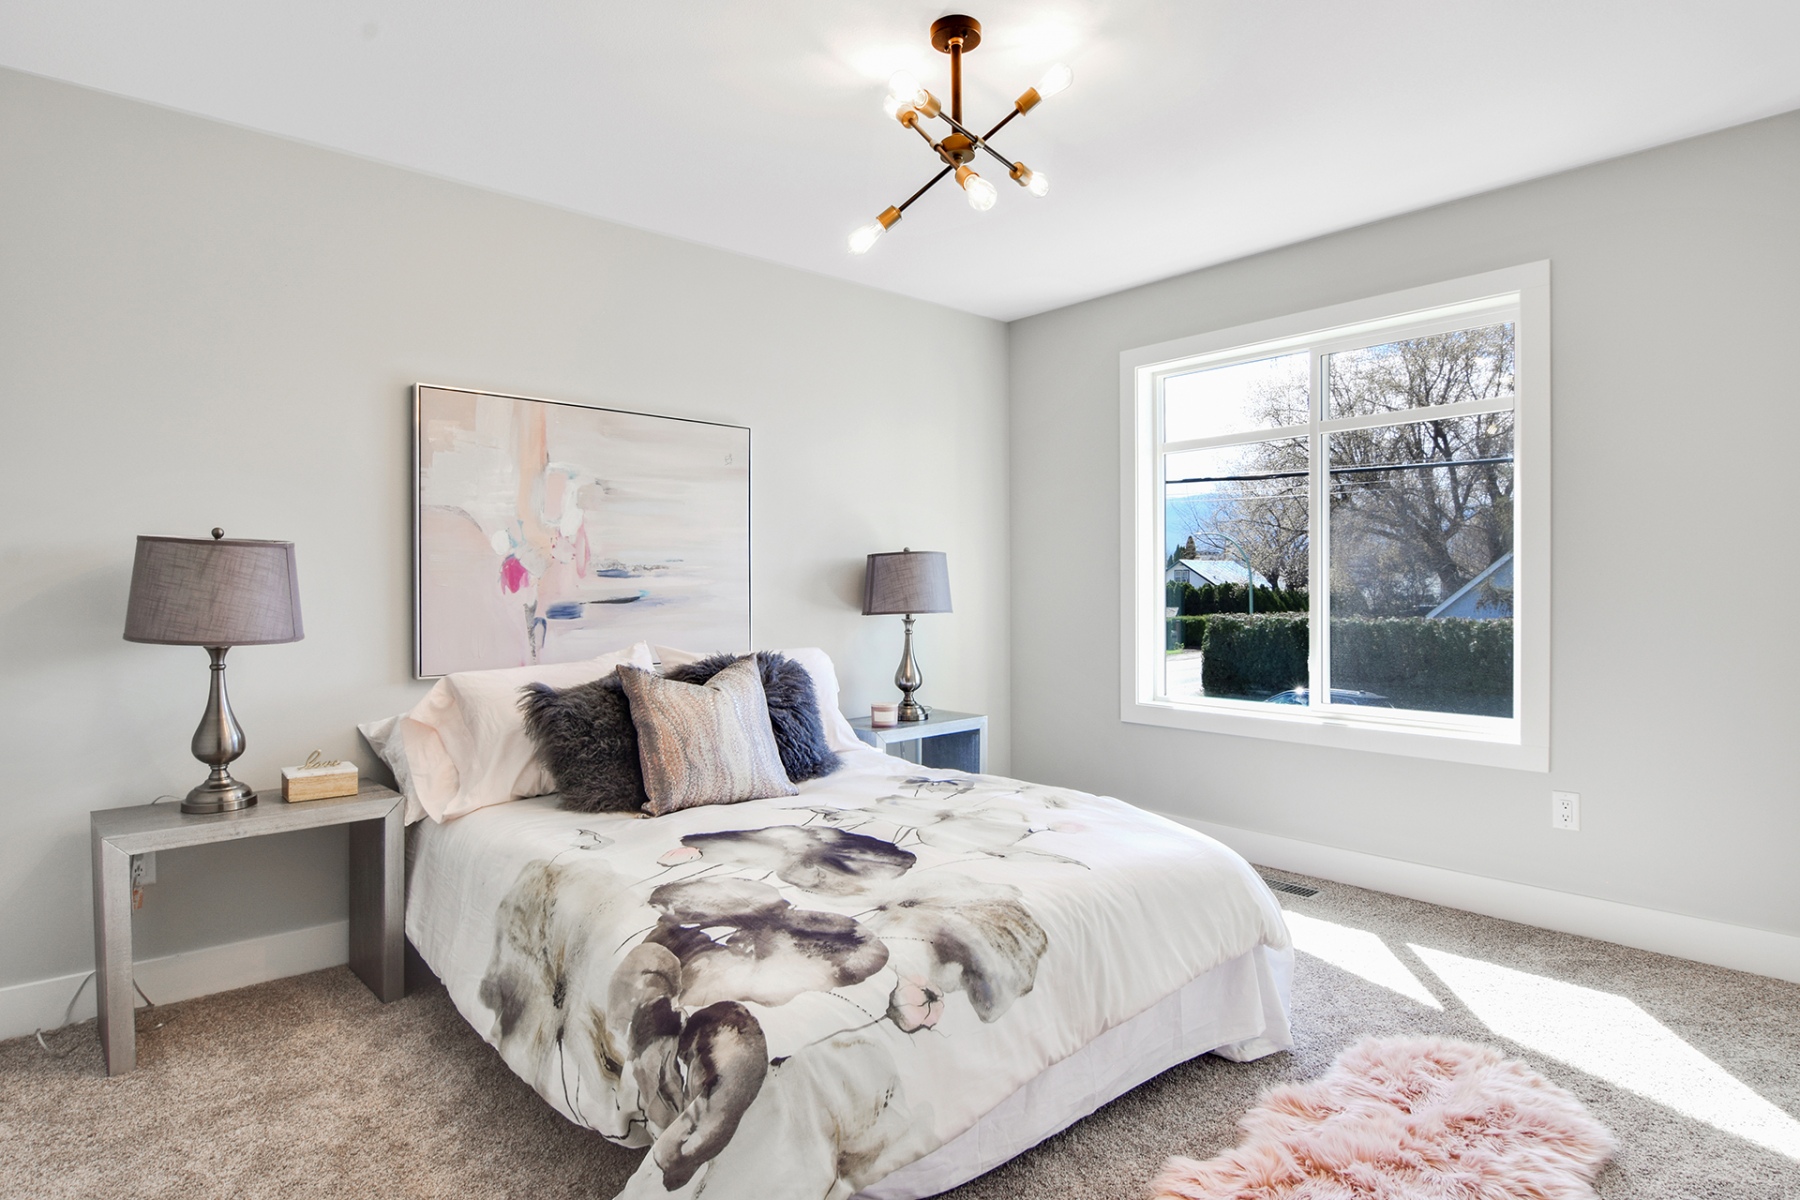 1_harmony_homes_glenwood_infill_project_bed_room_gallery_image_17